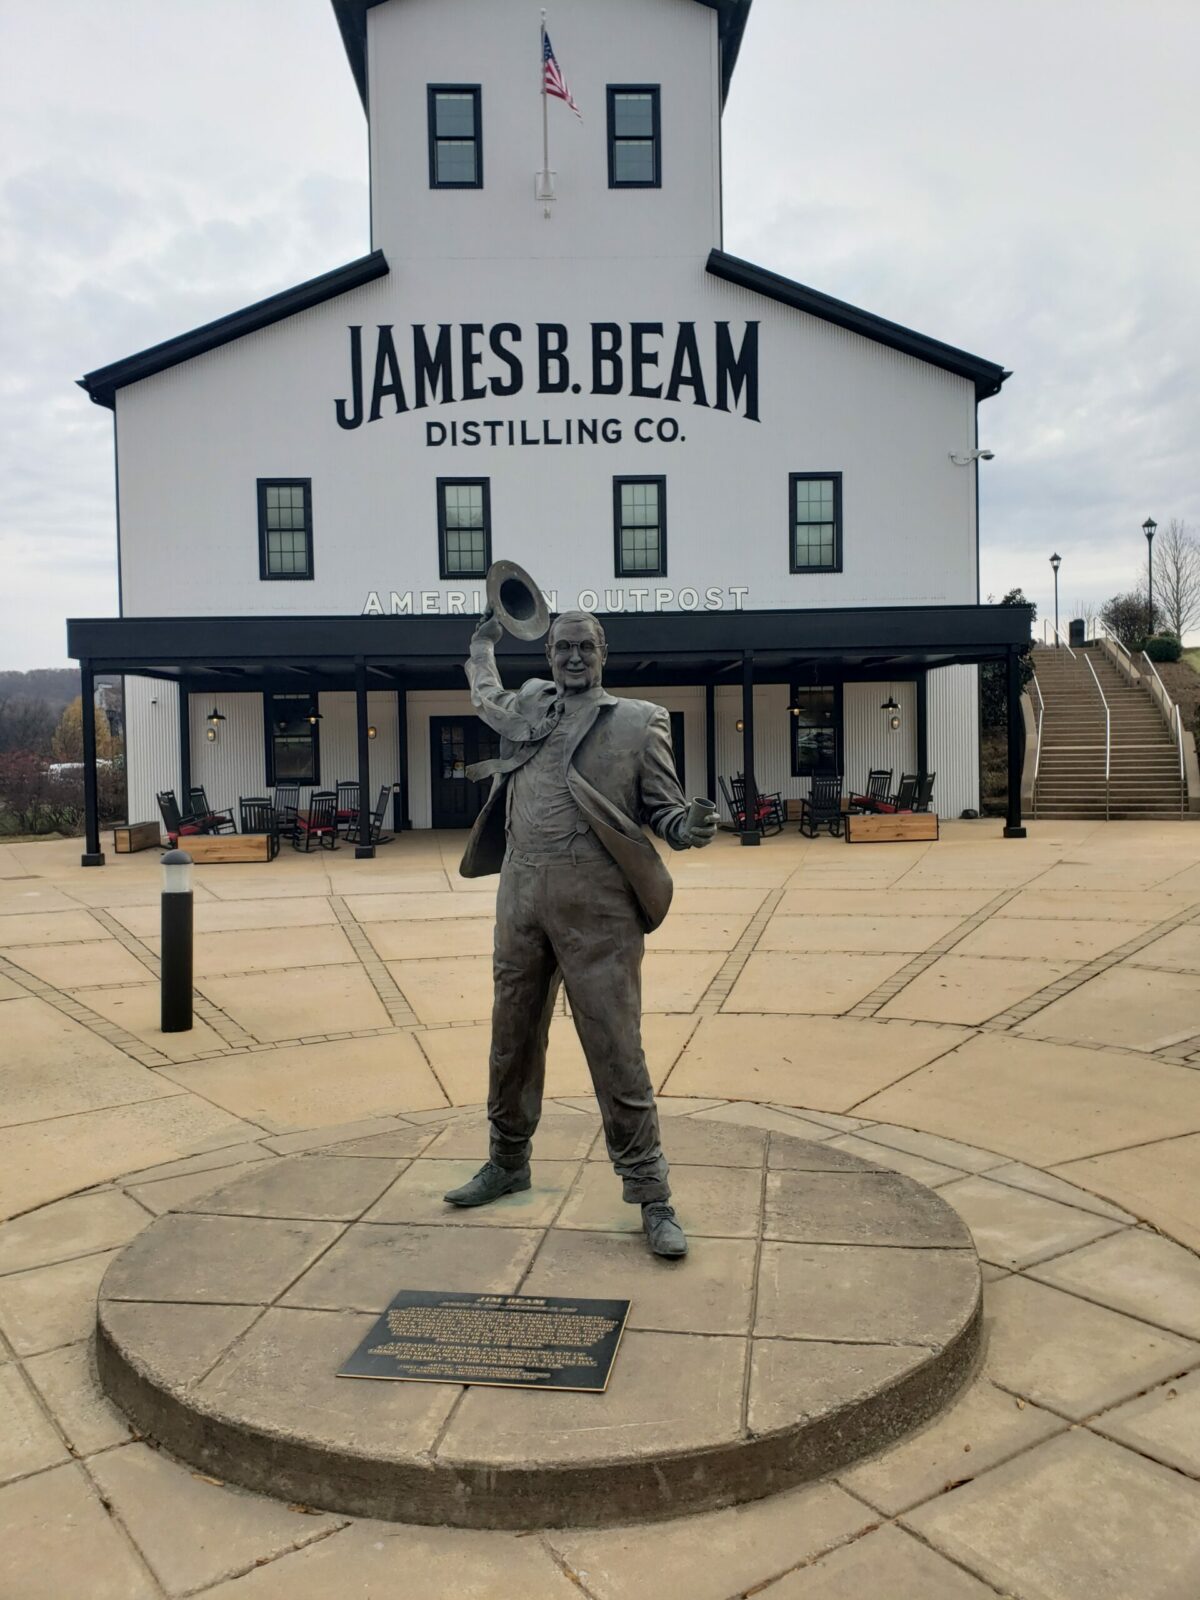 The newly renovated American Outpost at James B Beam Distilling Co